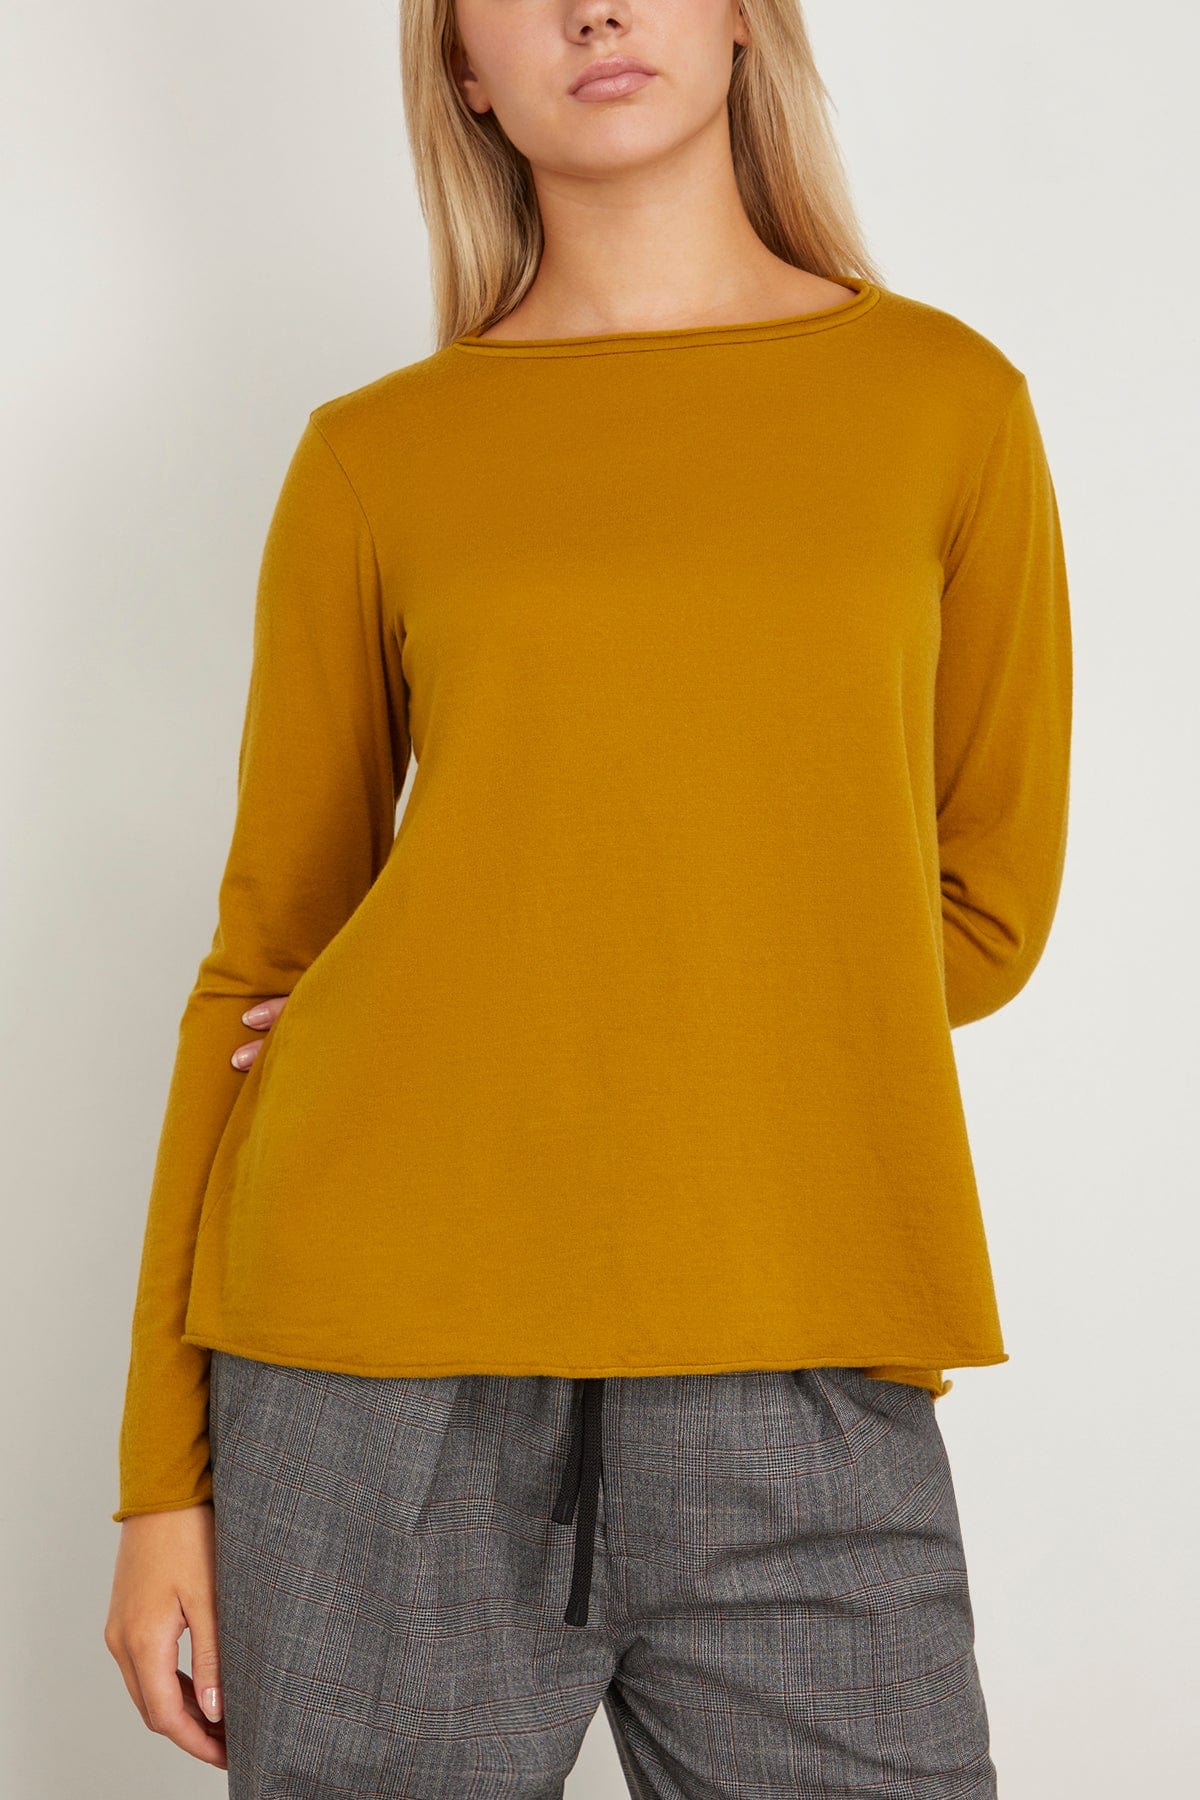 Labo.Art Tops Maglia Jeppe Charme in Curry Labo.Art Maglia Jeppe Charme in Curry